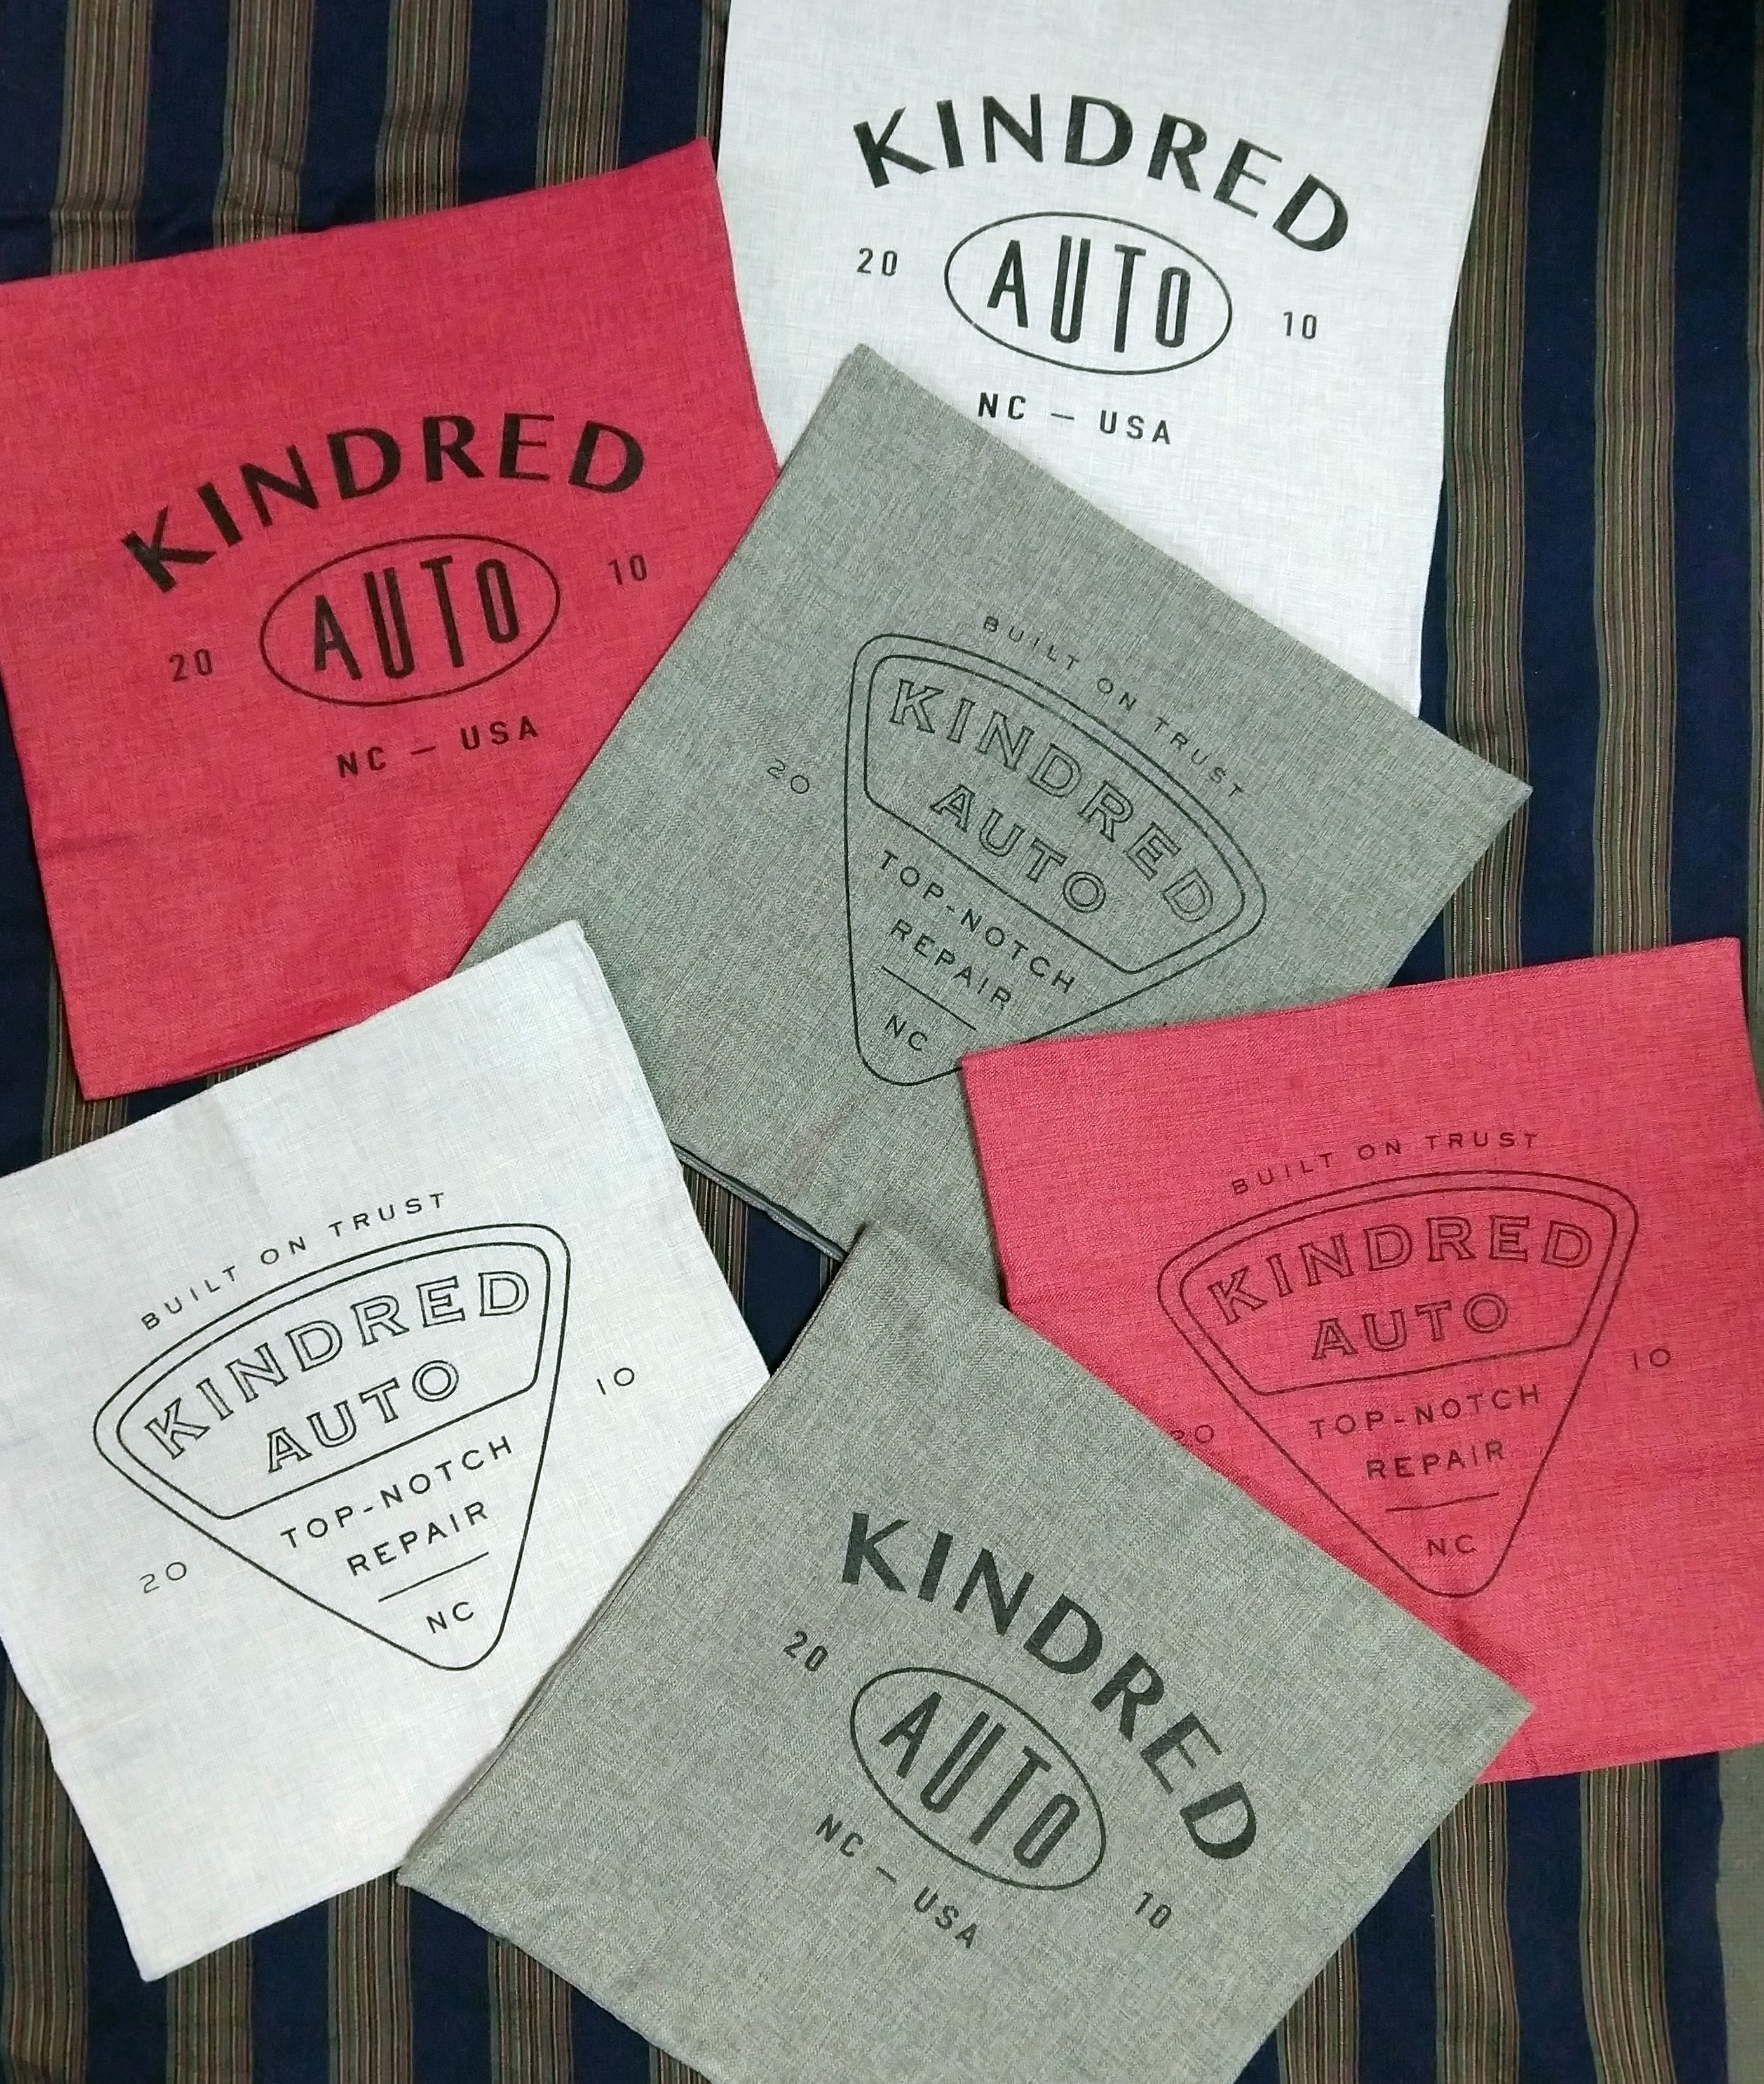 Kindred Auto pillowcases